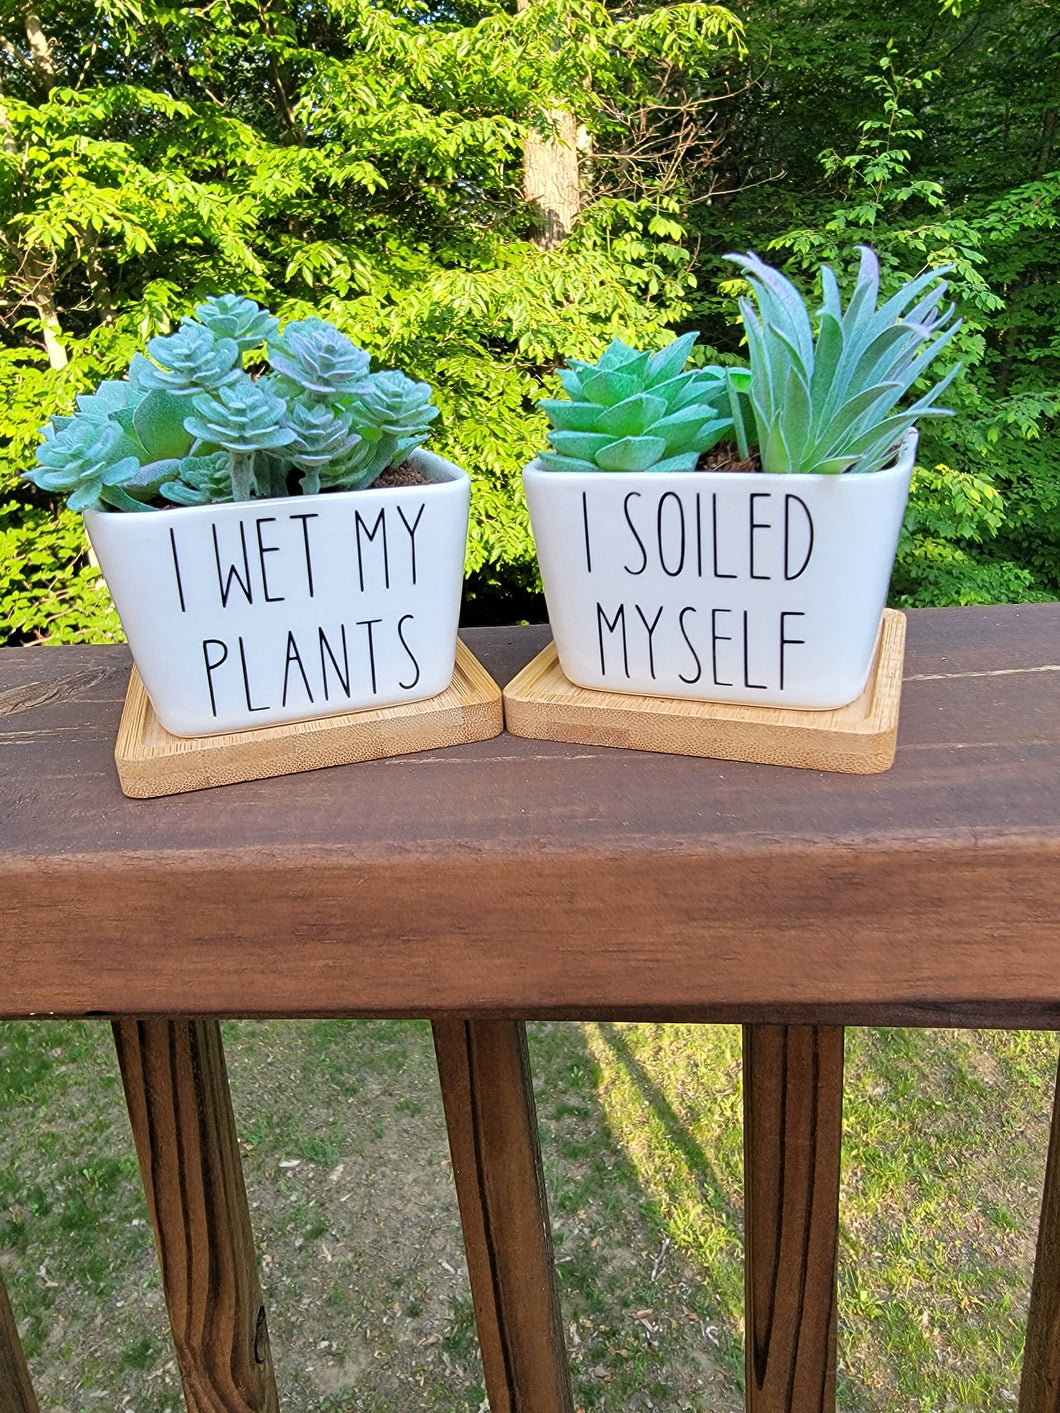 2 Square Succulent Planters I Soiled Myself I Wet My Plants